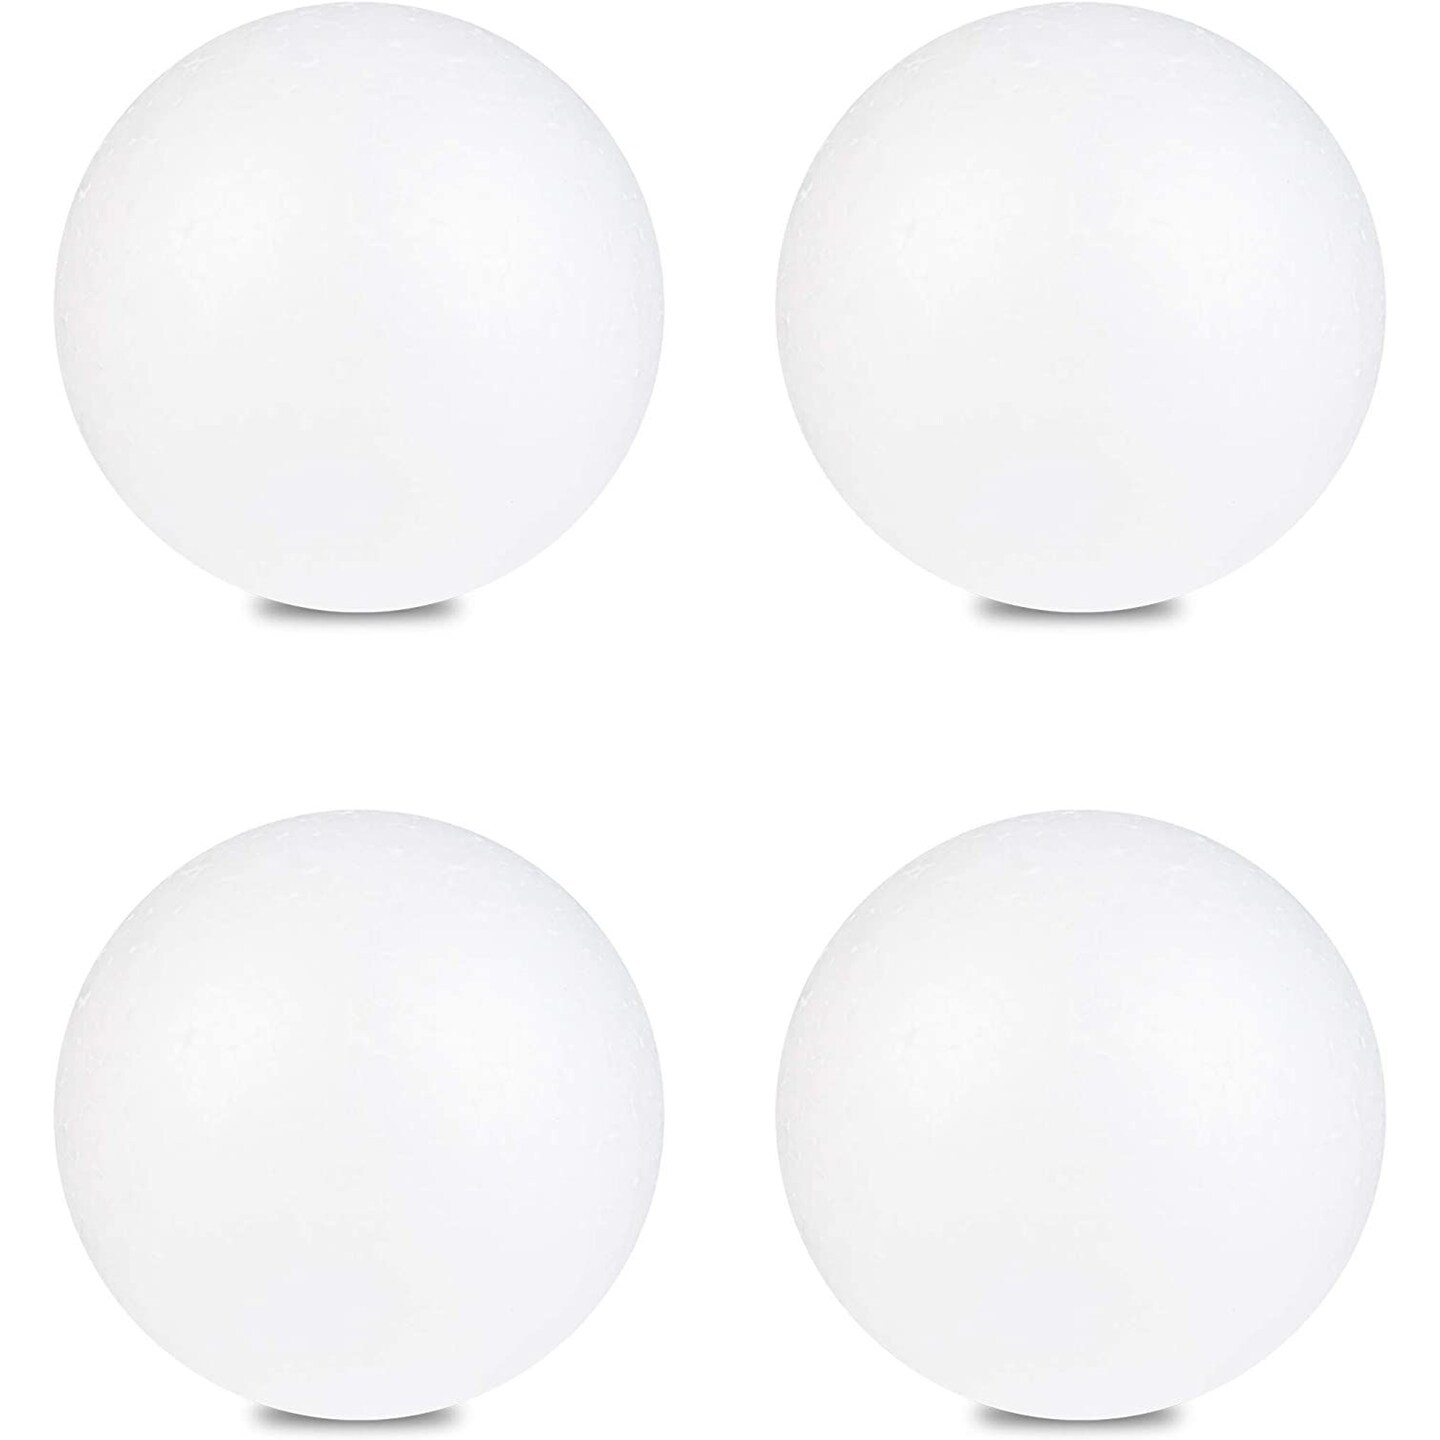 MT Products 5 inch Round White Polystyrene Foam Balls for Crafts - Pack of 4